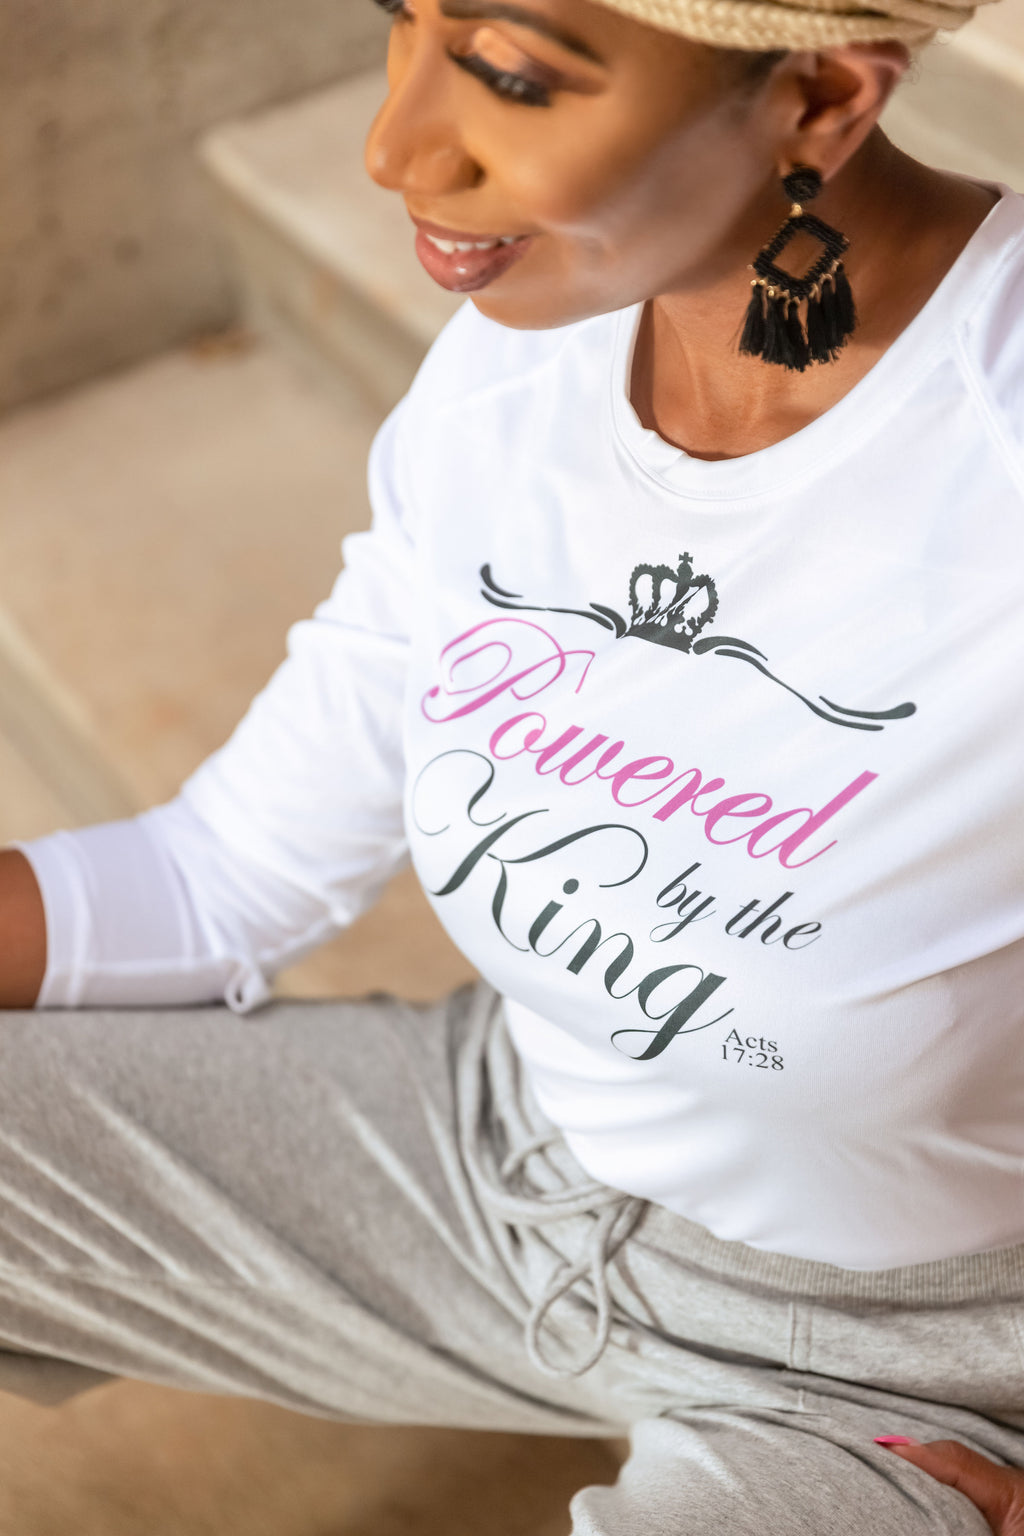 Powered by The King Tee